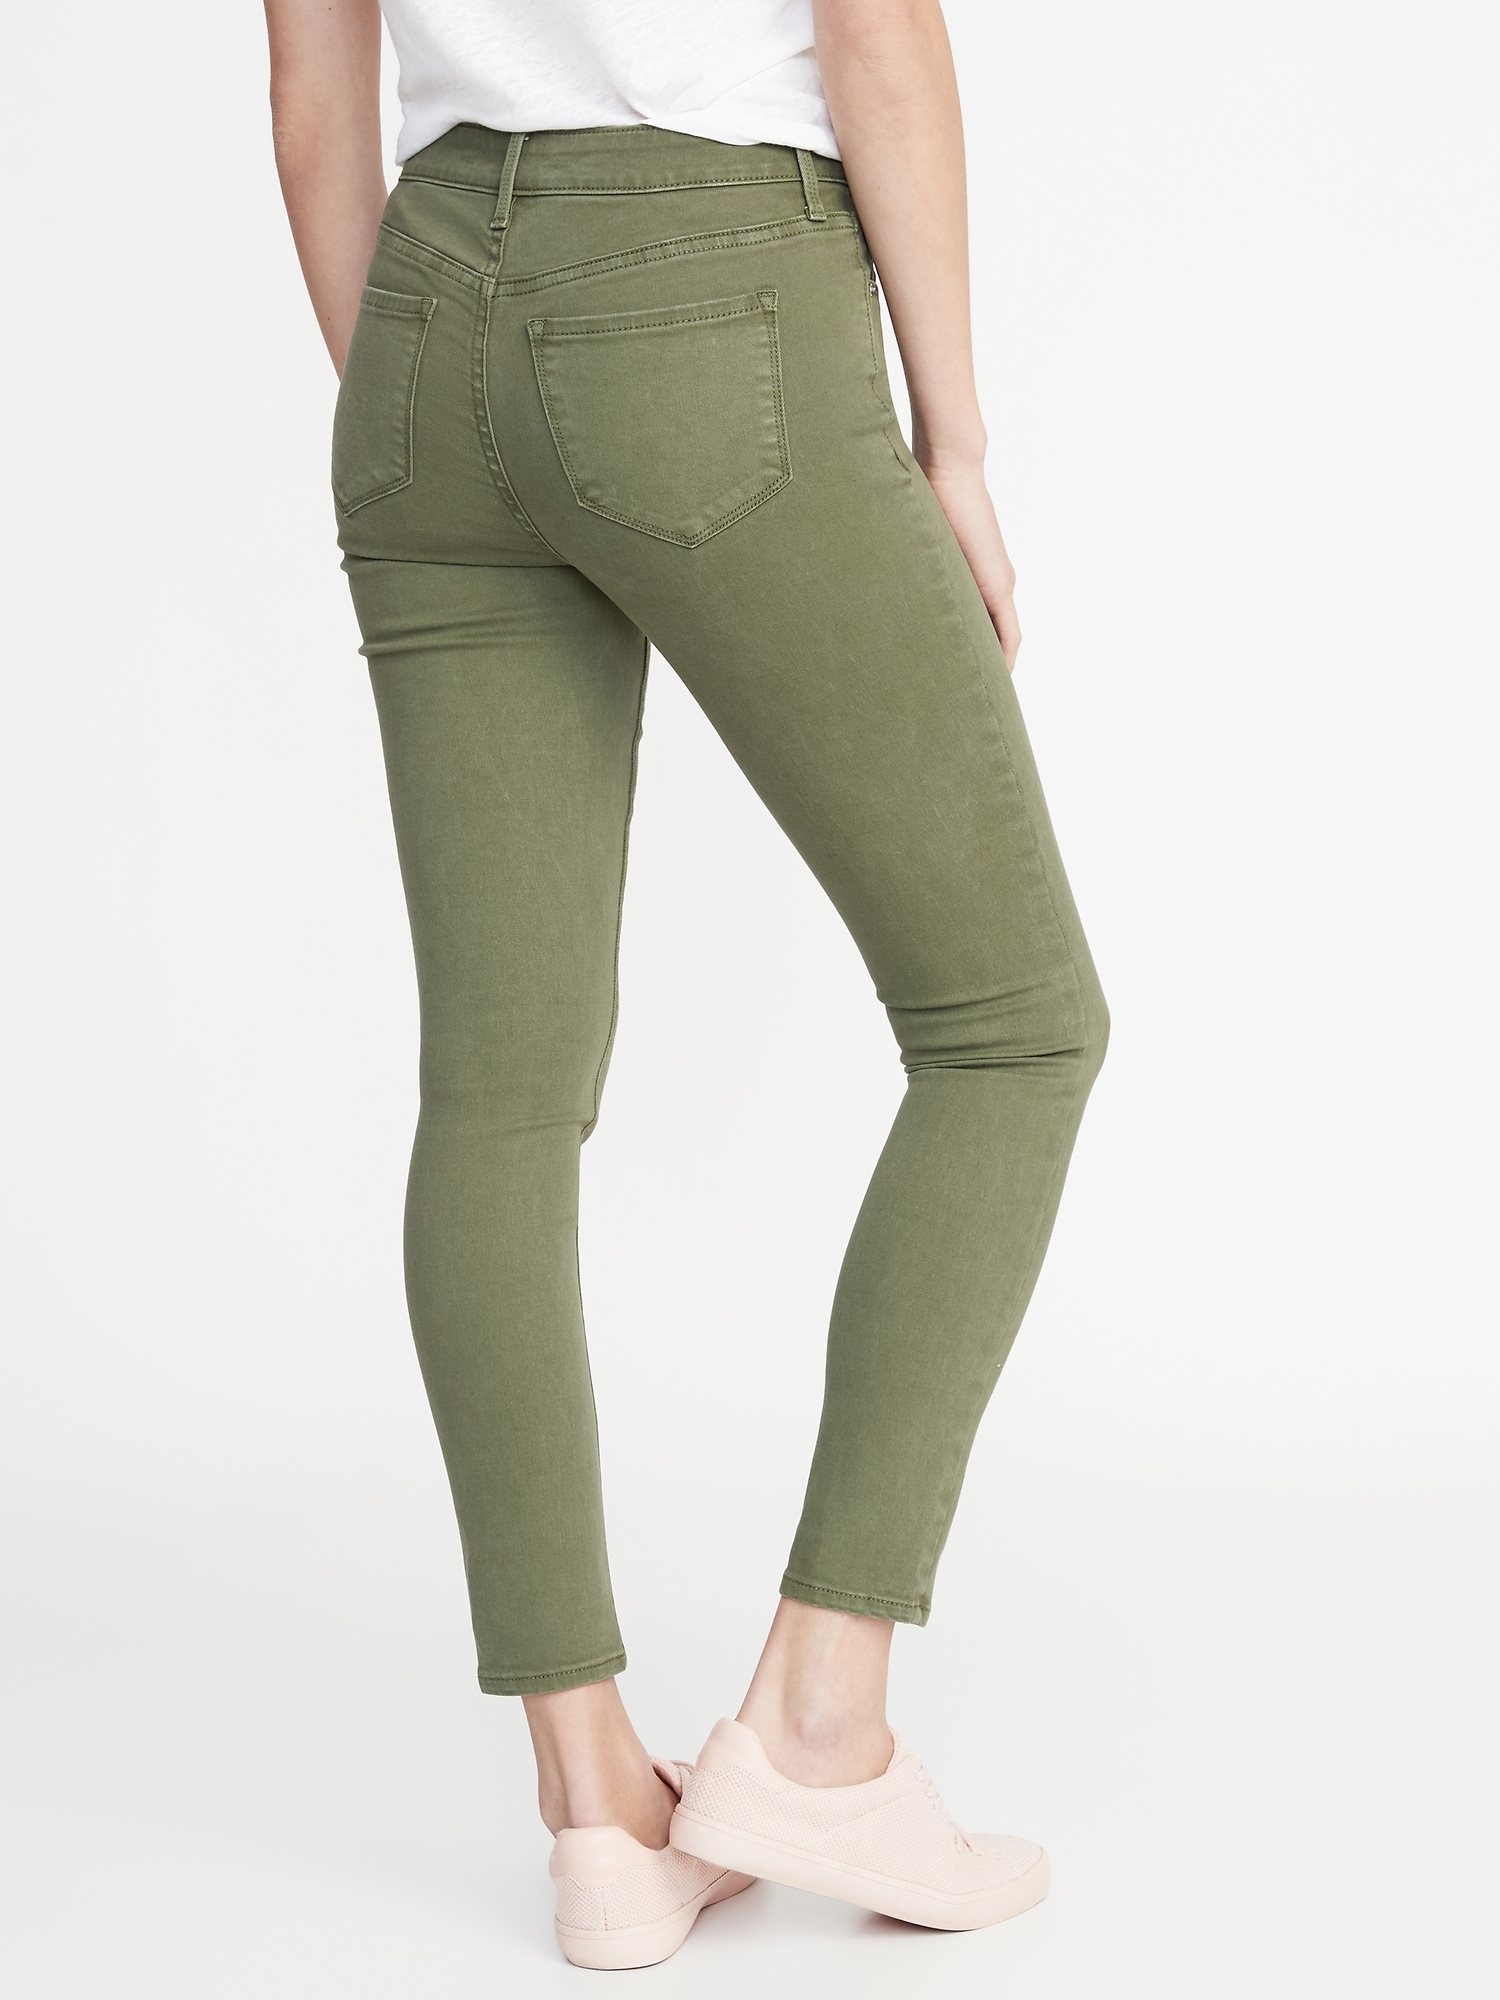 olive colored women's jeans